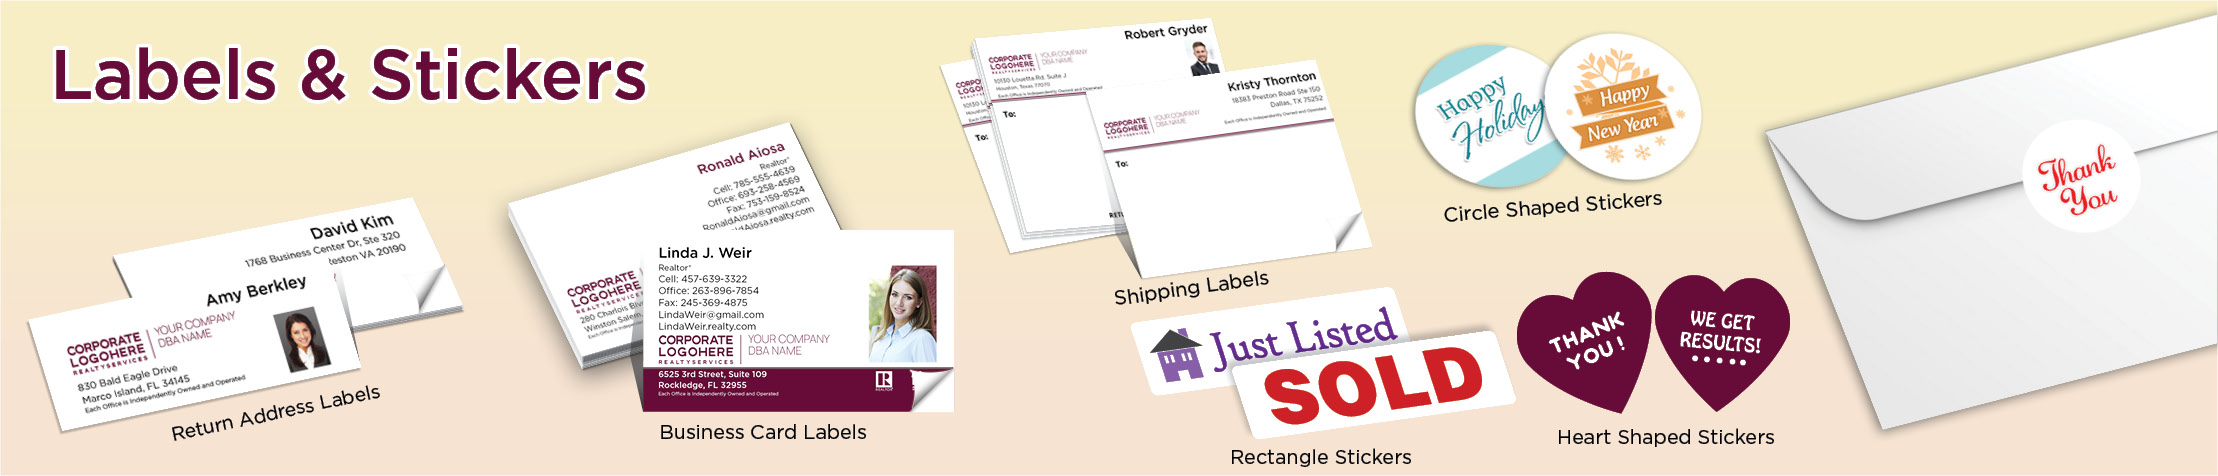 Berkshire Hathaway Real Estate Labels and Stickers - Berkshire Hathaway  business card labels, return address labels, shipping labels, and assorted stickers | BestPrintBuy.com